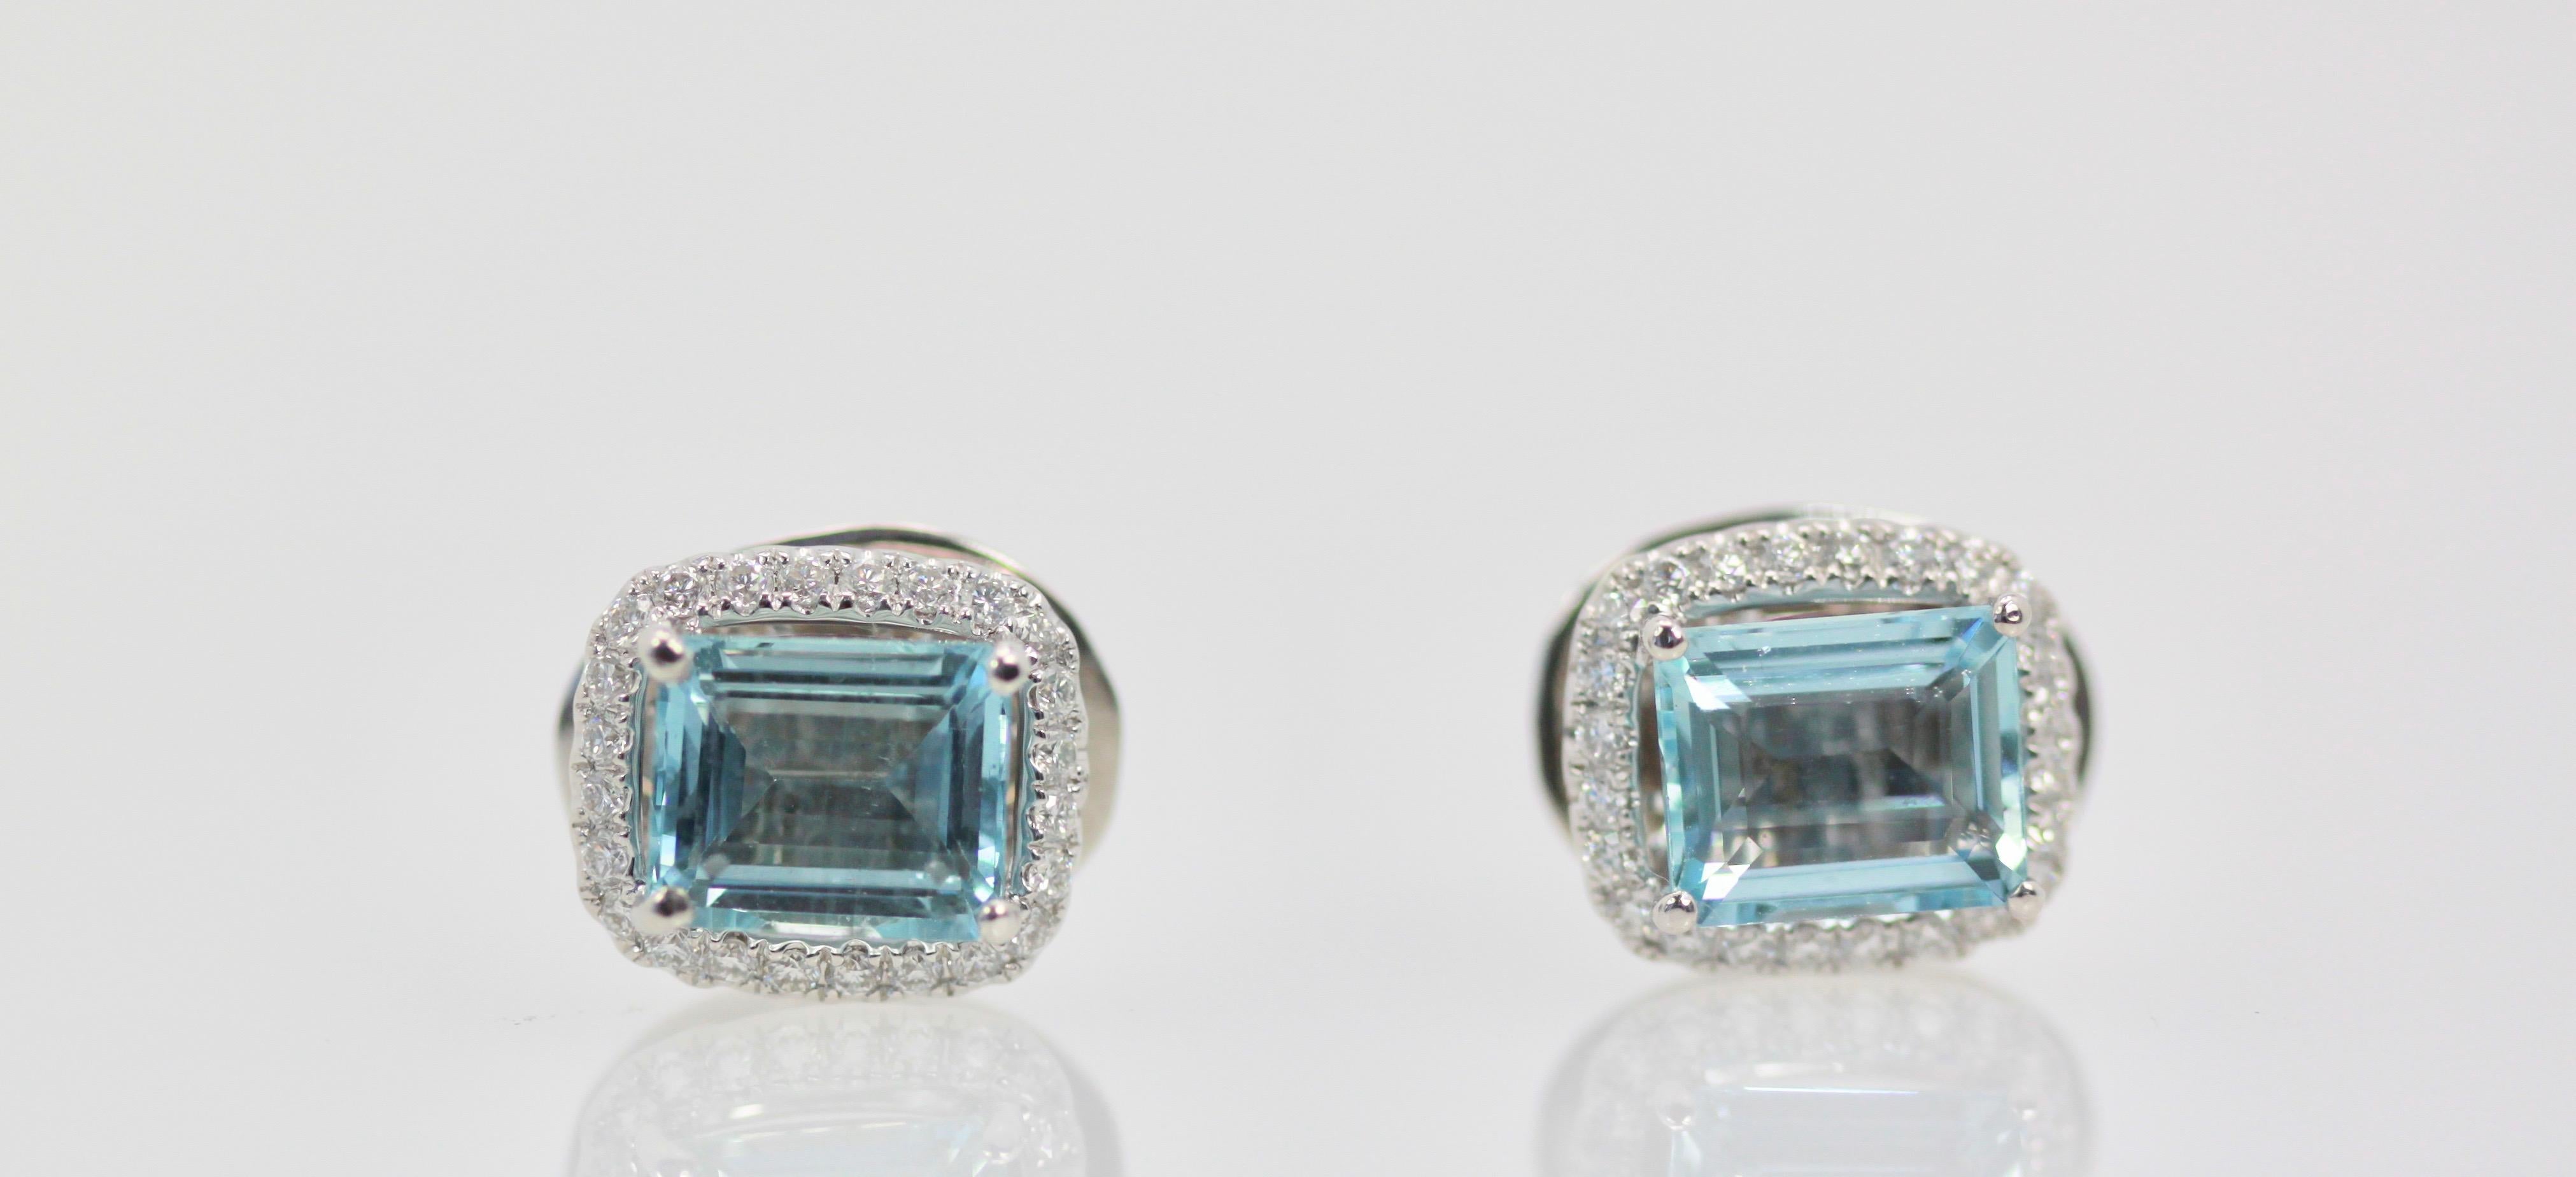 Aquamarine Earrings matches all the Aquamarine I have listed.  These were hand made for me by my local jeweler.  They boast Aquamarines very clean at 6.45 Carats each earrings to total 12.90 carats of Aquamarine.  They are surrounded by Diamonds G-H